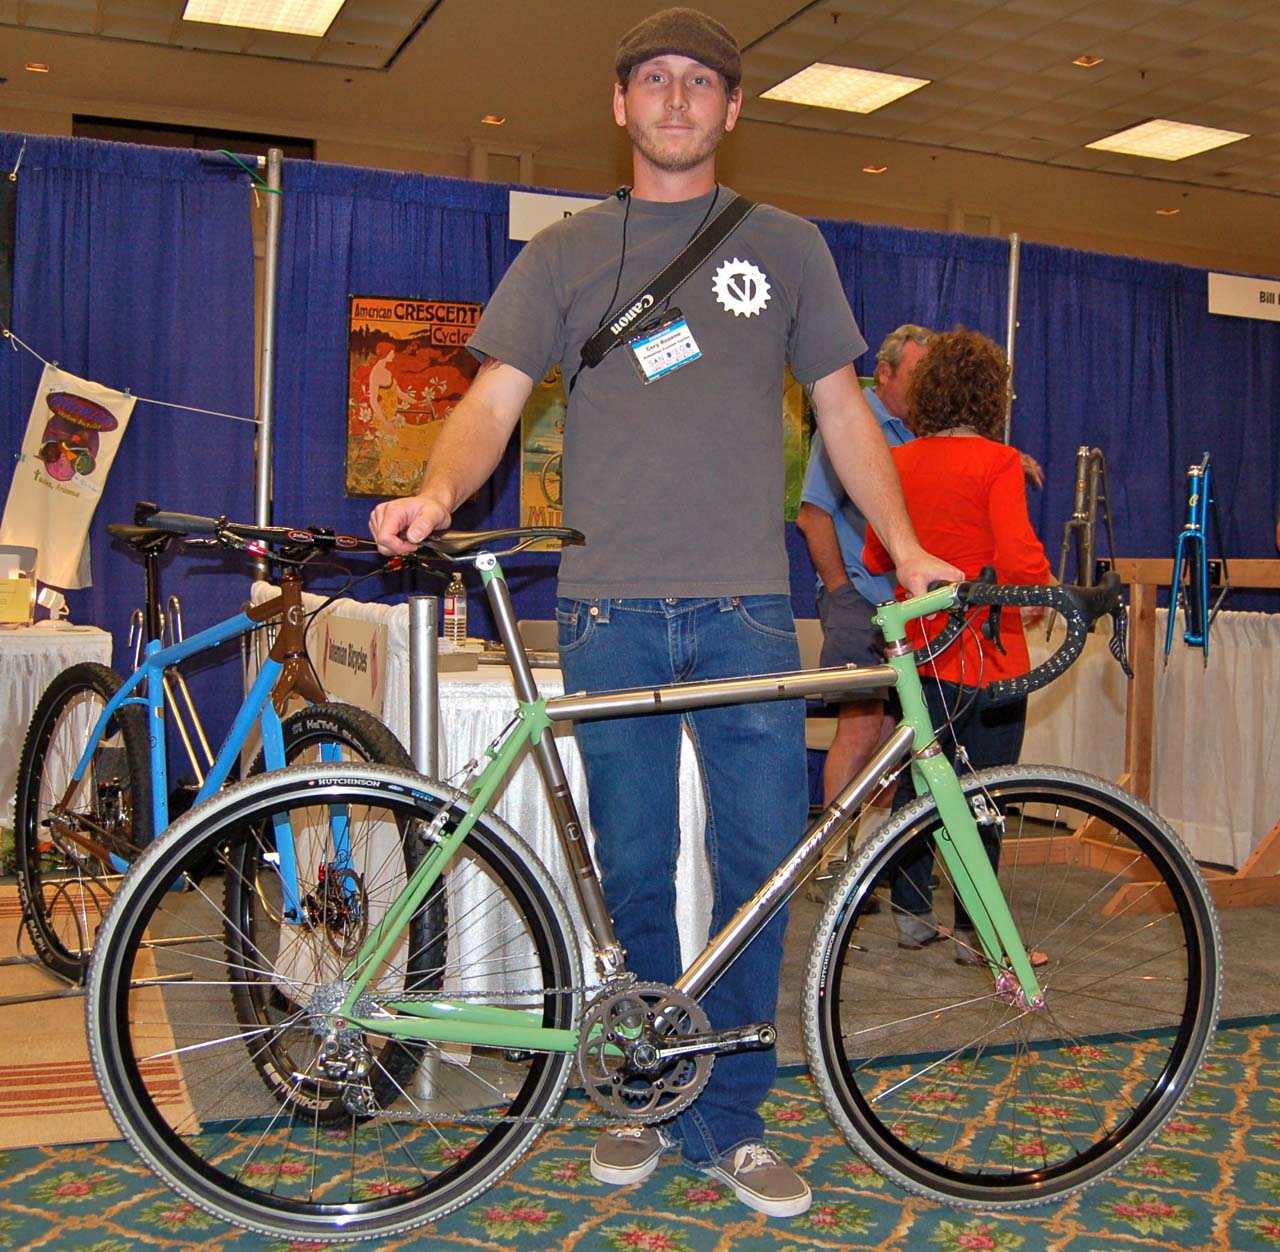 Cory Rosene took a two-week frame building class from Dave Bohm (Bohemian Bikes) and decided not to leave. After an extended apprenticeship with Bohm, Rosene is now striking out on his own. Here he shows off the second Rosene ever made, a gorgeous steel lugged cyclocross frame. ? Dave Lawson